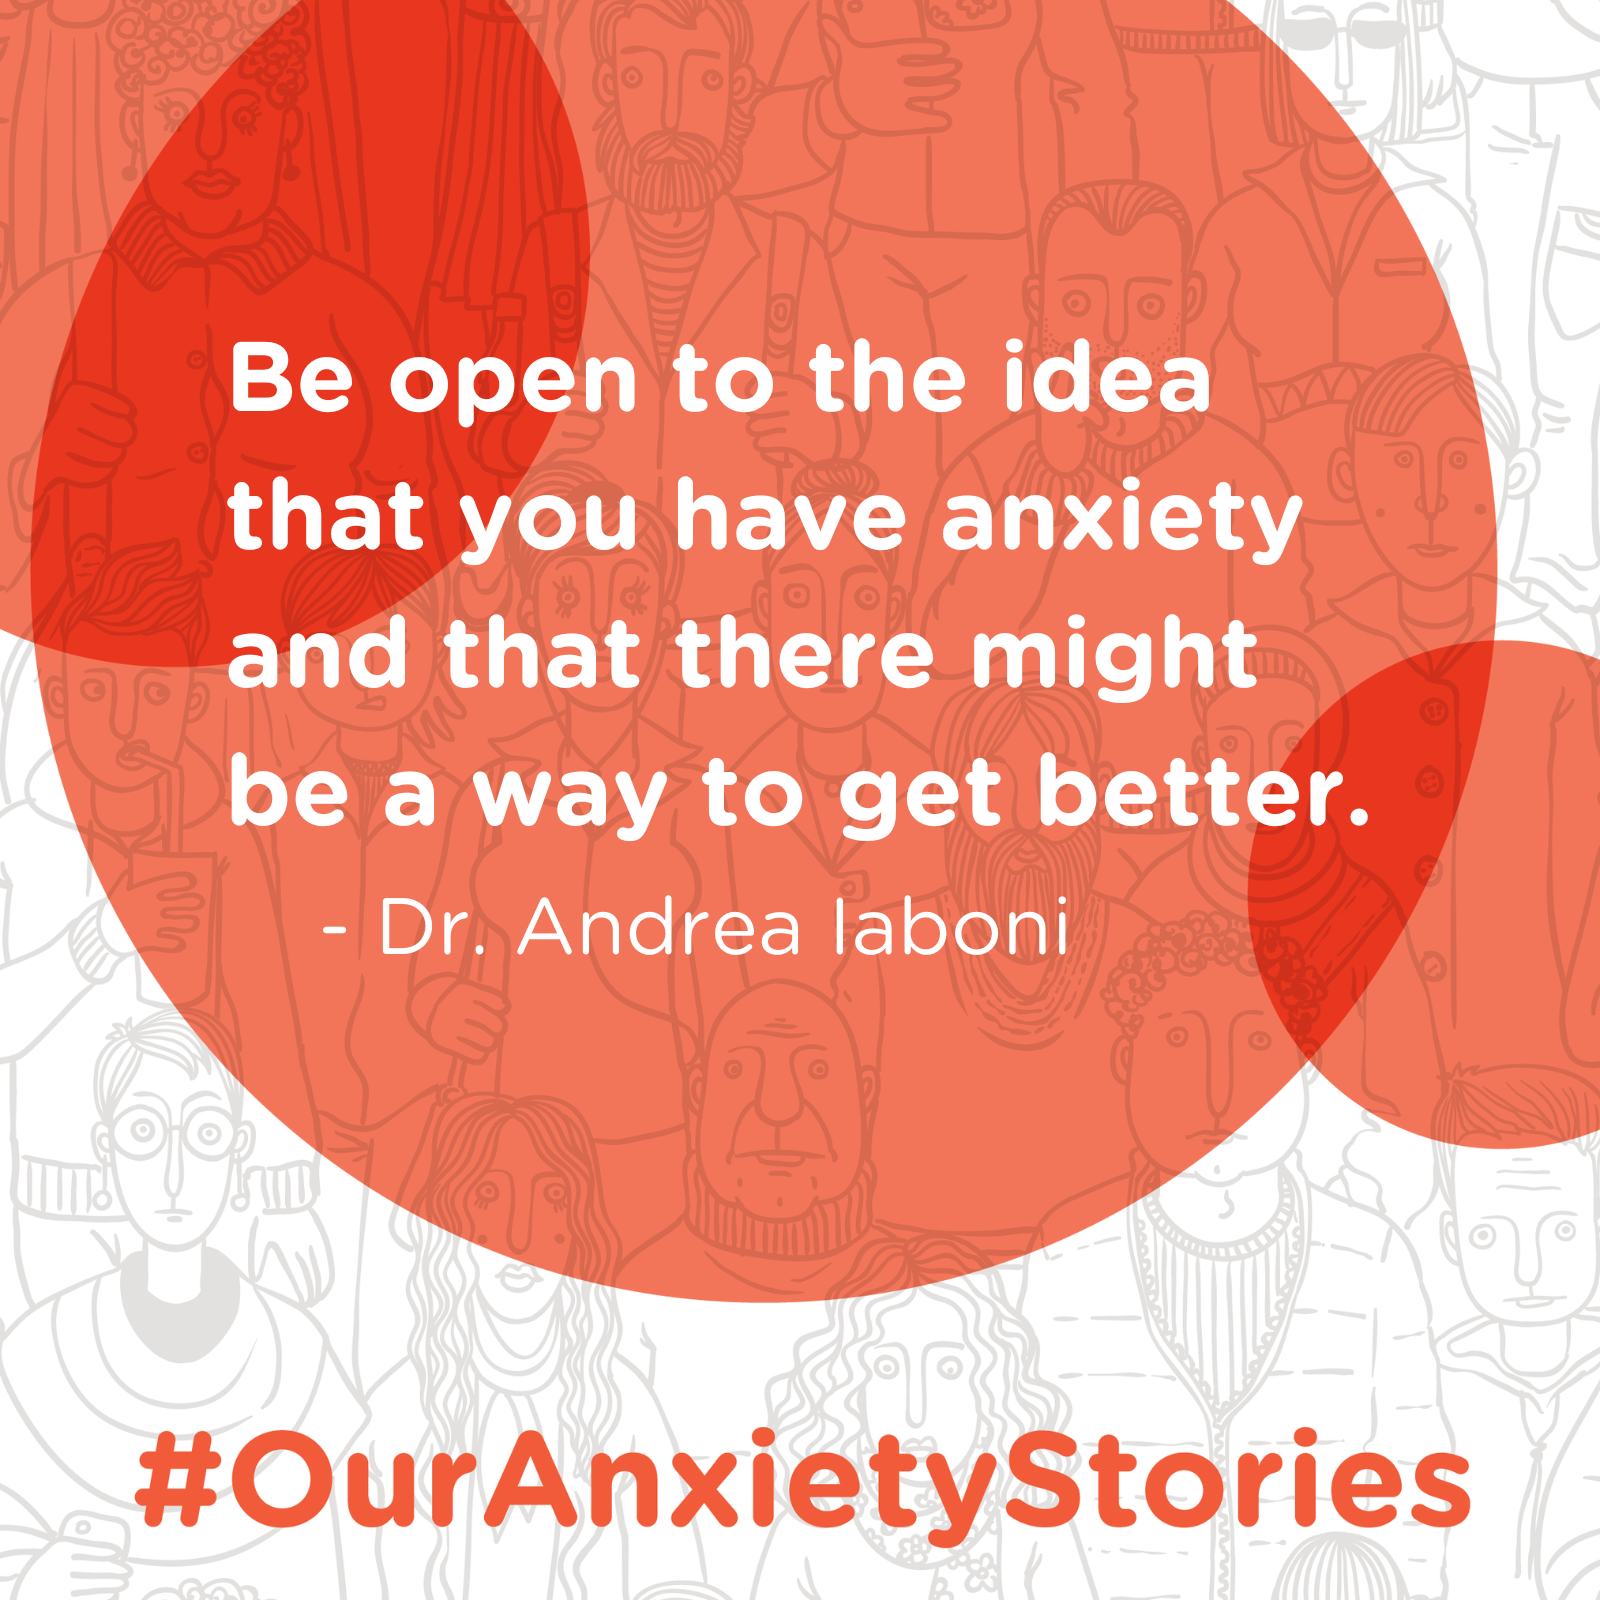 Be open to the idea that you have anxiety and there might be a way to get better. Dr. Andrea Iaboni